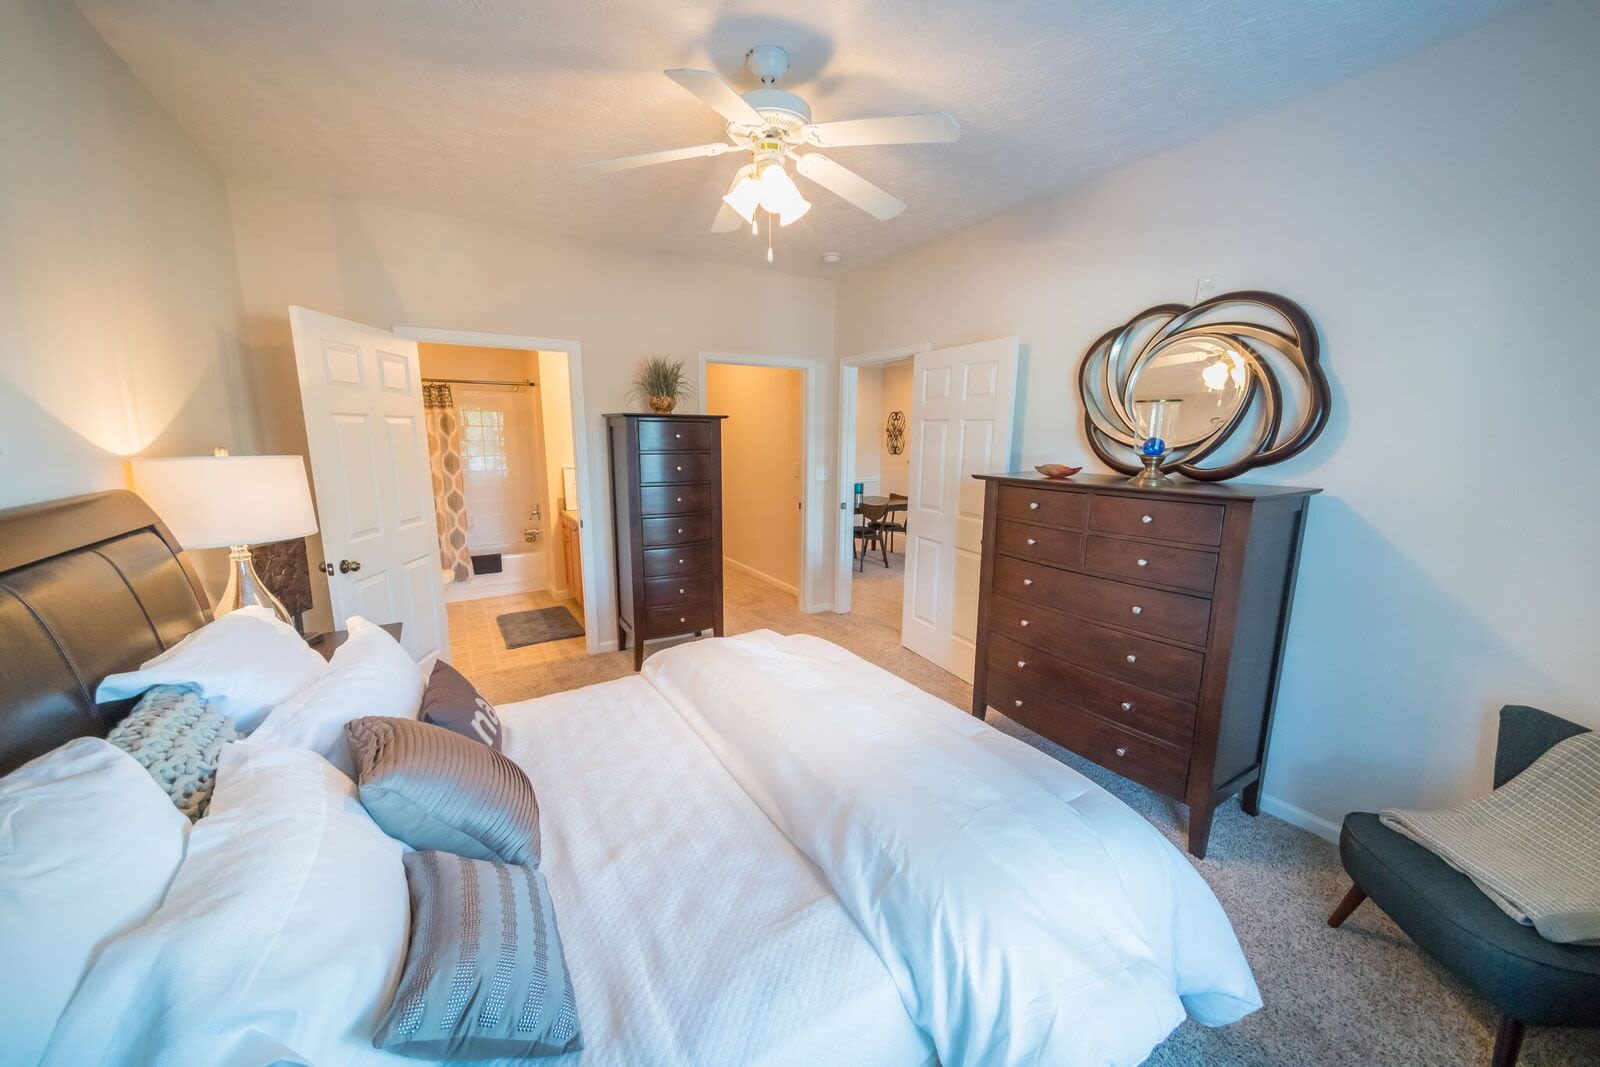 Haddon Place offers a natrually well-lit bedroom in McDonough, Georgia